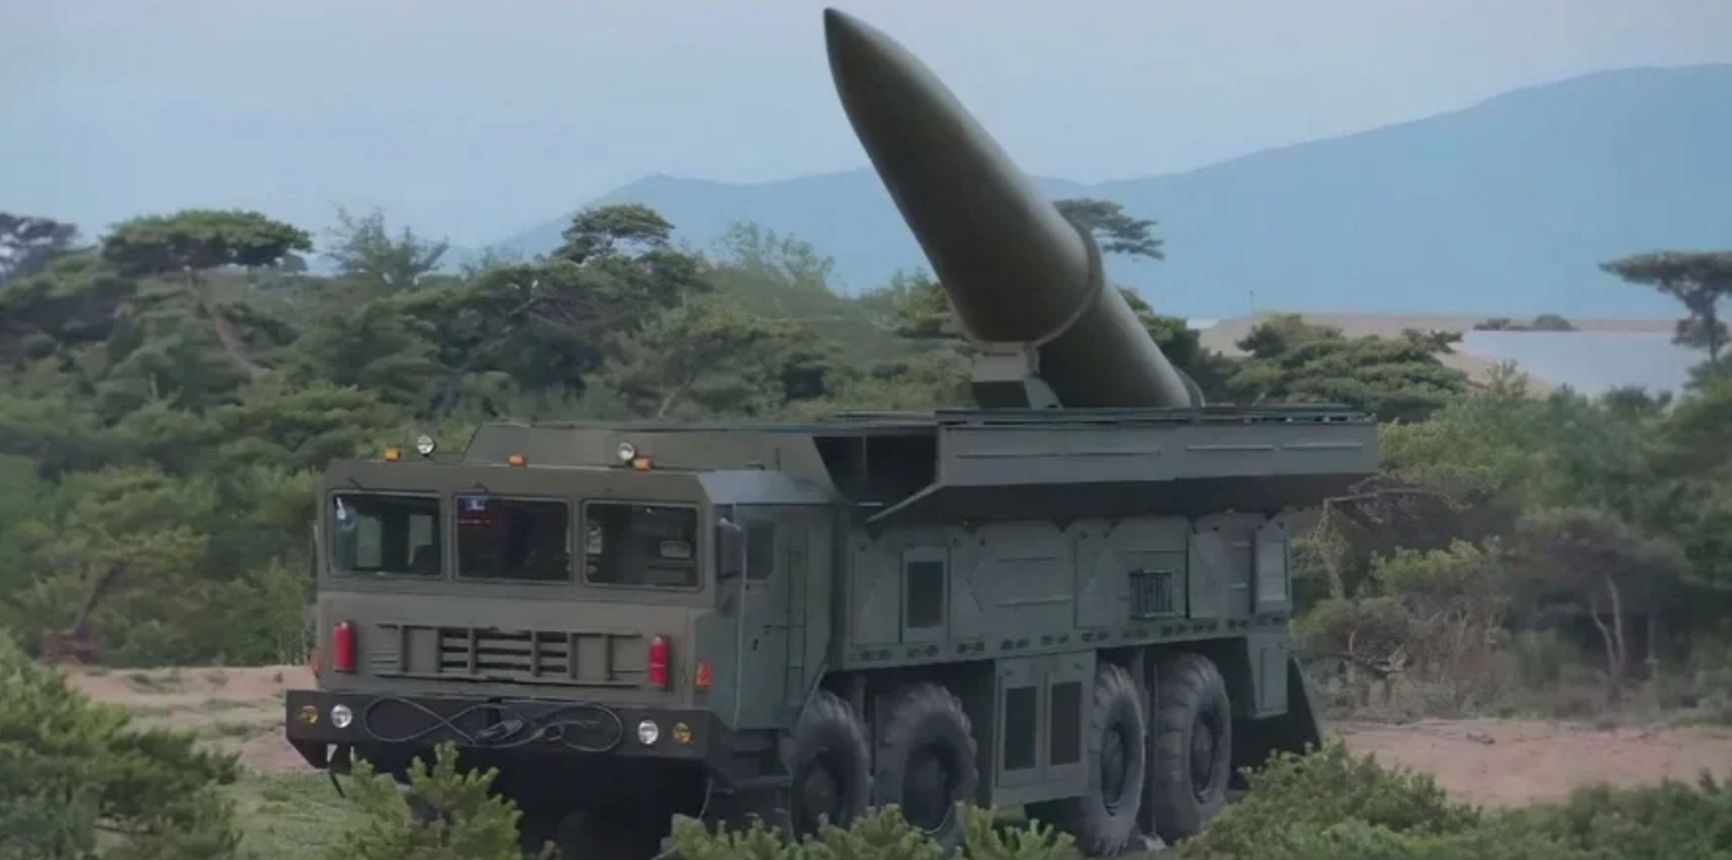 A KN-23 missile